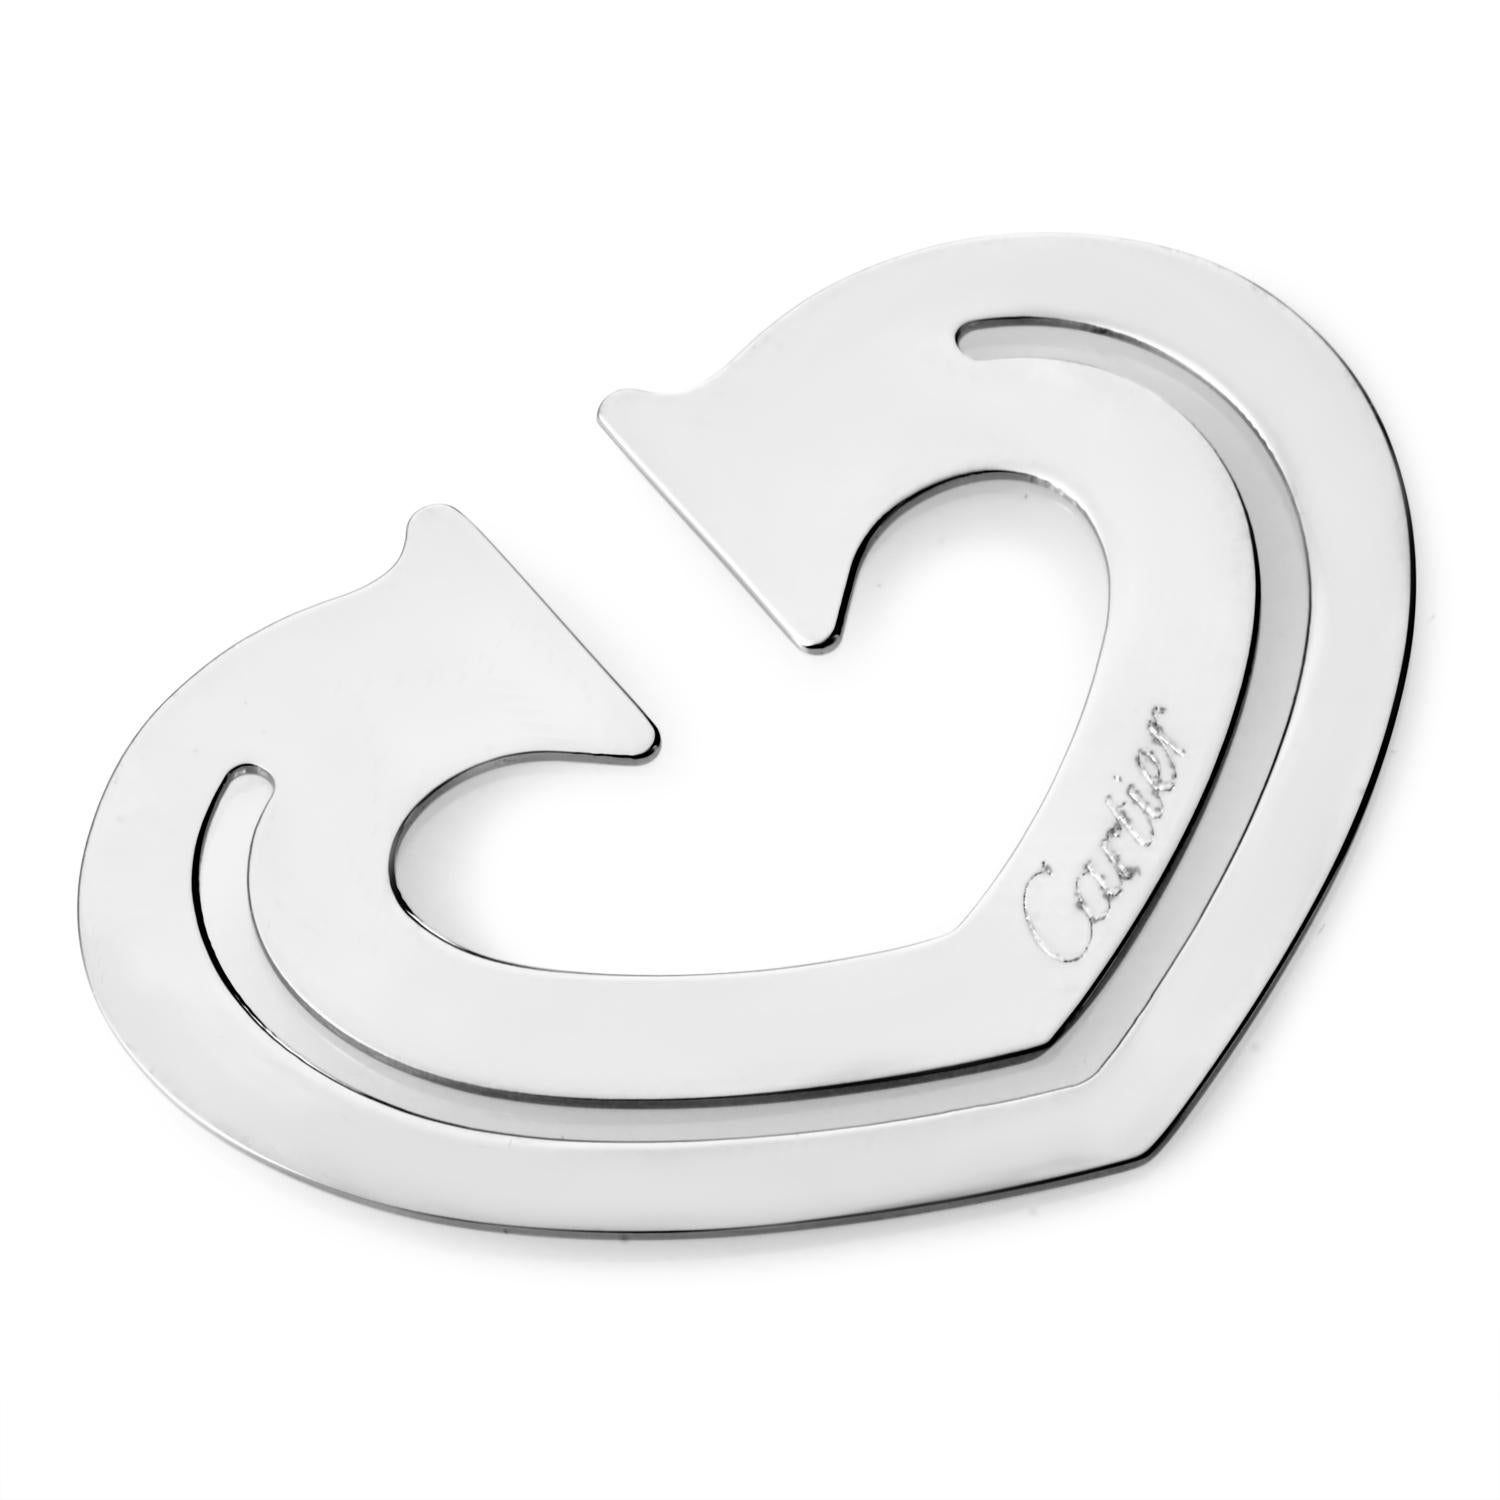 A creatively glamorous addition to one's lifestyle, this Cartier bookmark shaped like a heart is a stainless steel gem.